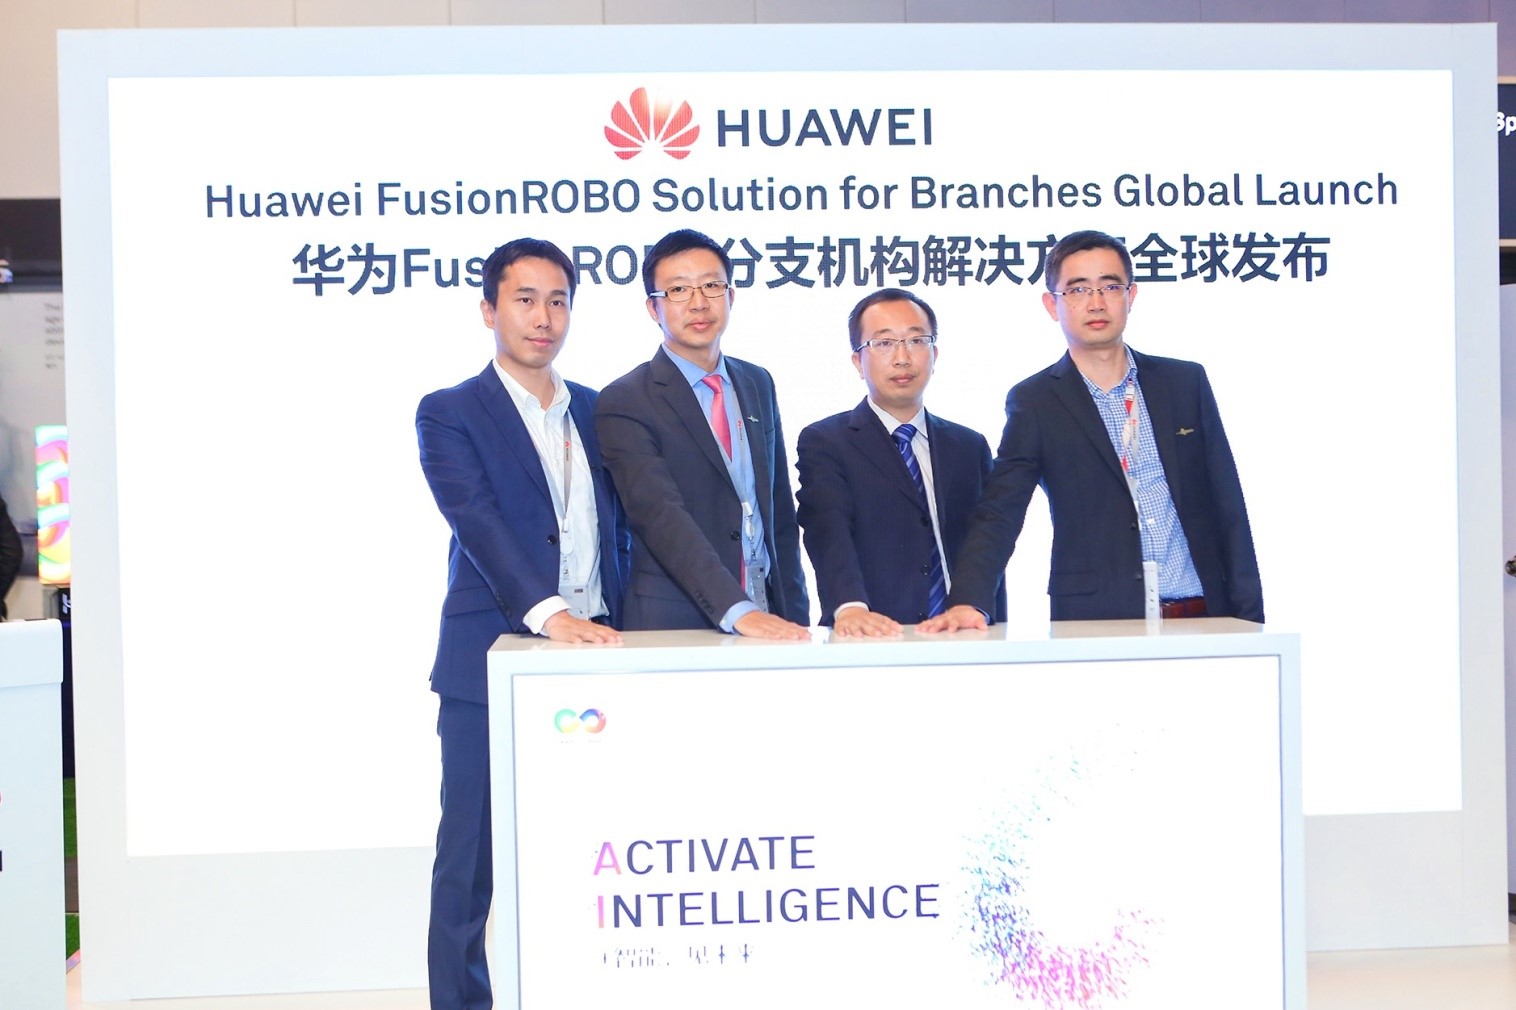 Huawei executives jointly release the FusionROBO Solution for enterprise branch management at HUAWEI CONNECT 2018